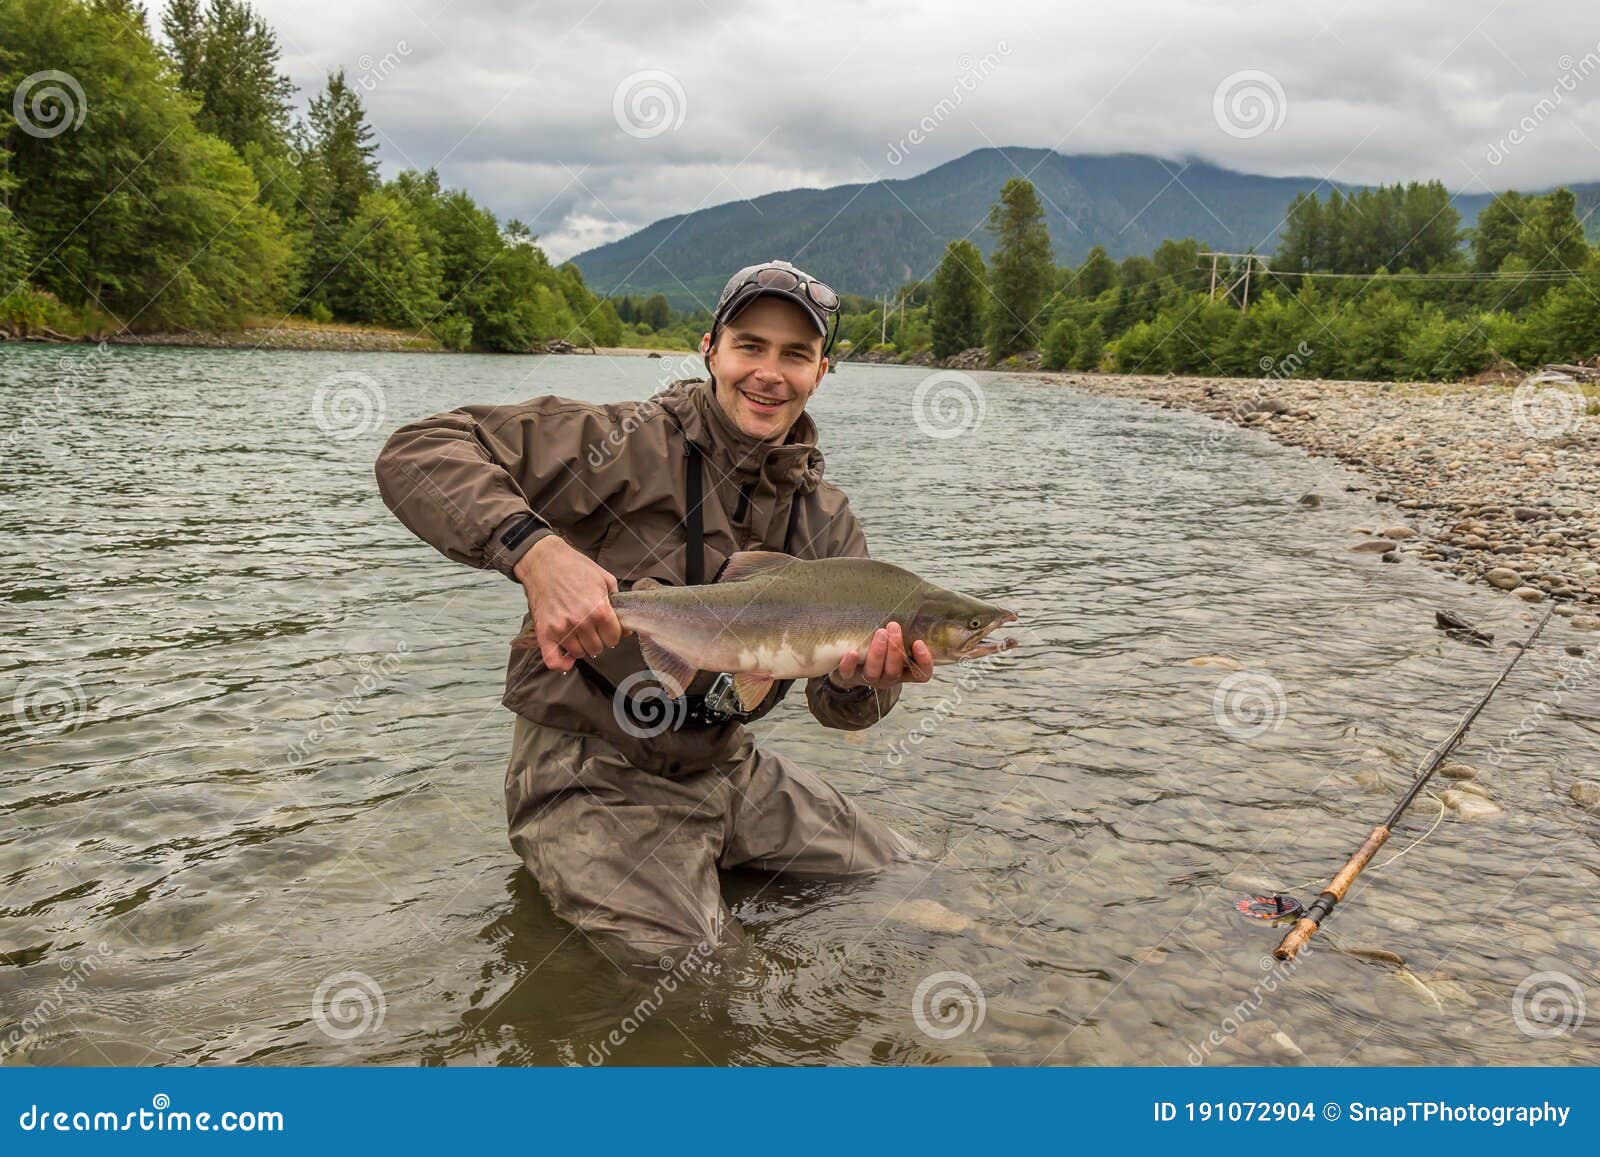 a fisherman holding a huge taimen trout caught on a river in mongolia, moron, mongolia